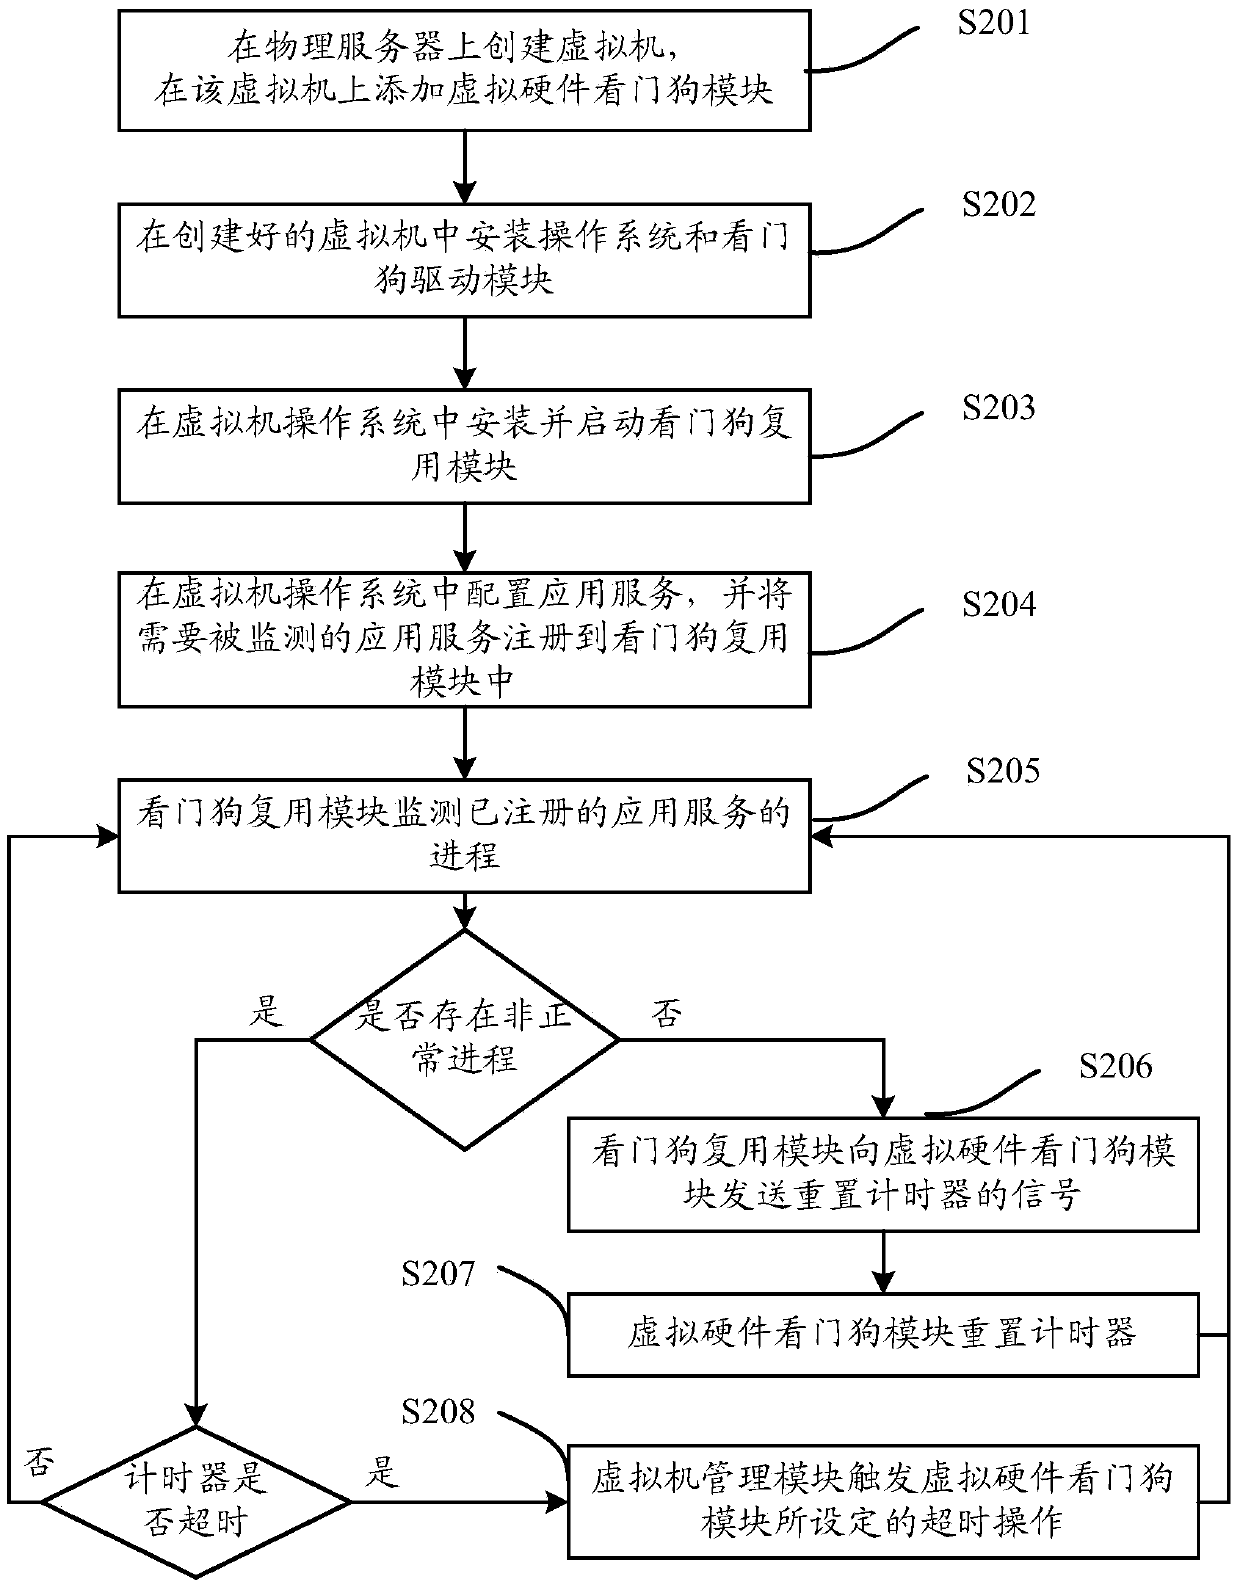 Virtual machine application service failure recovery system and method